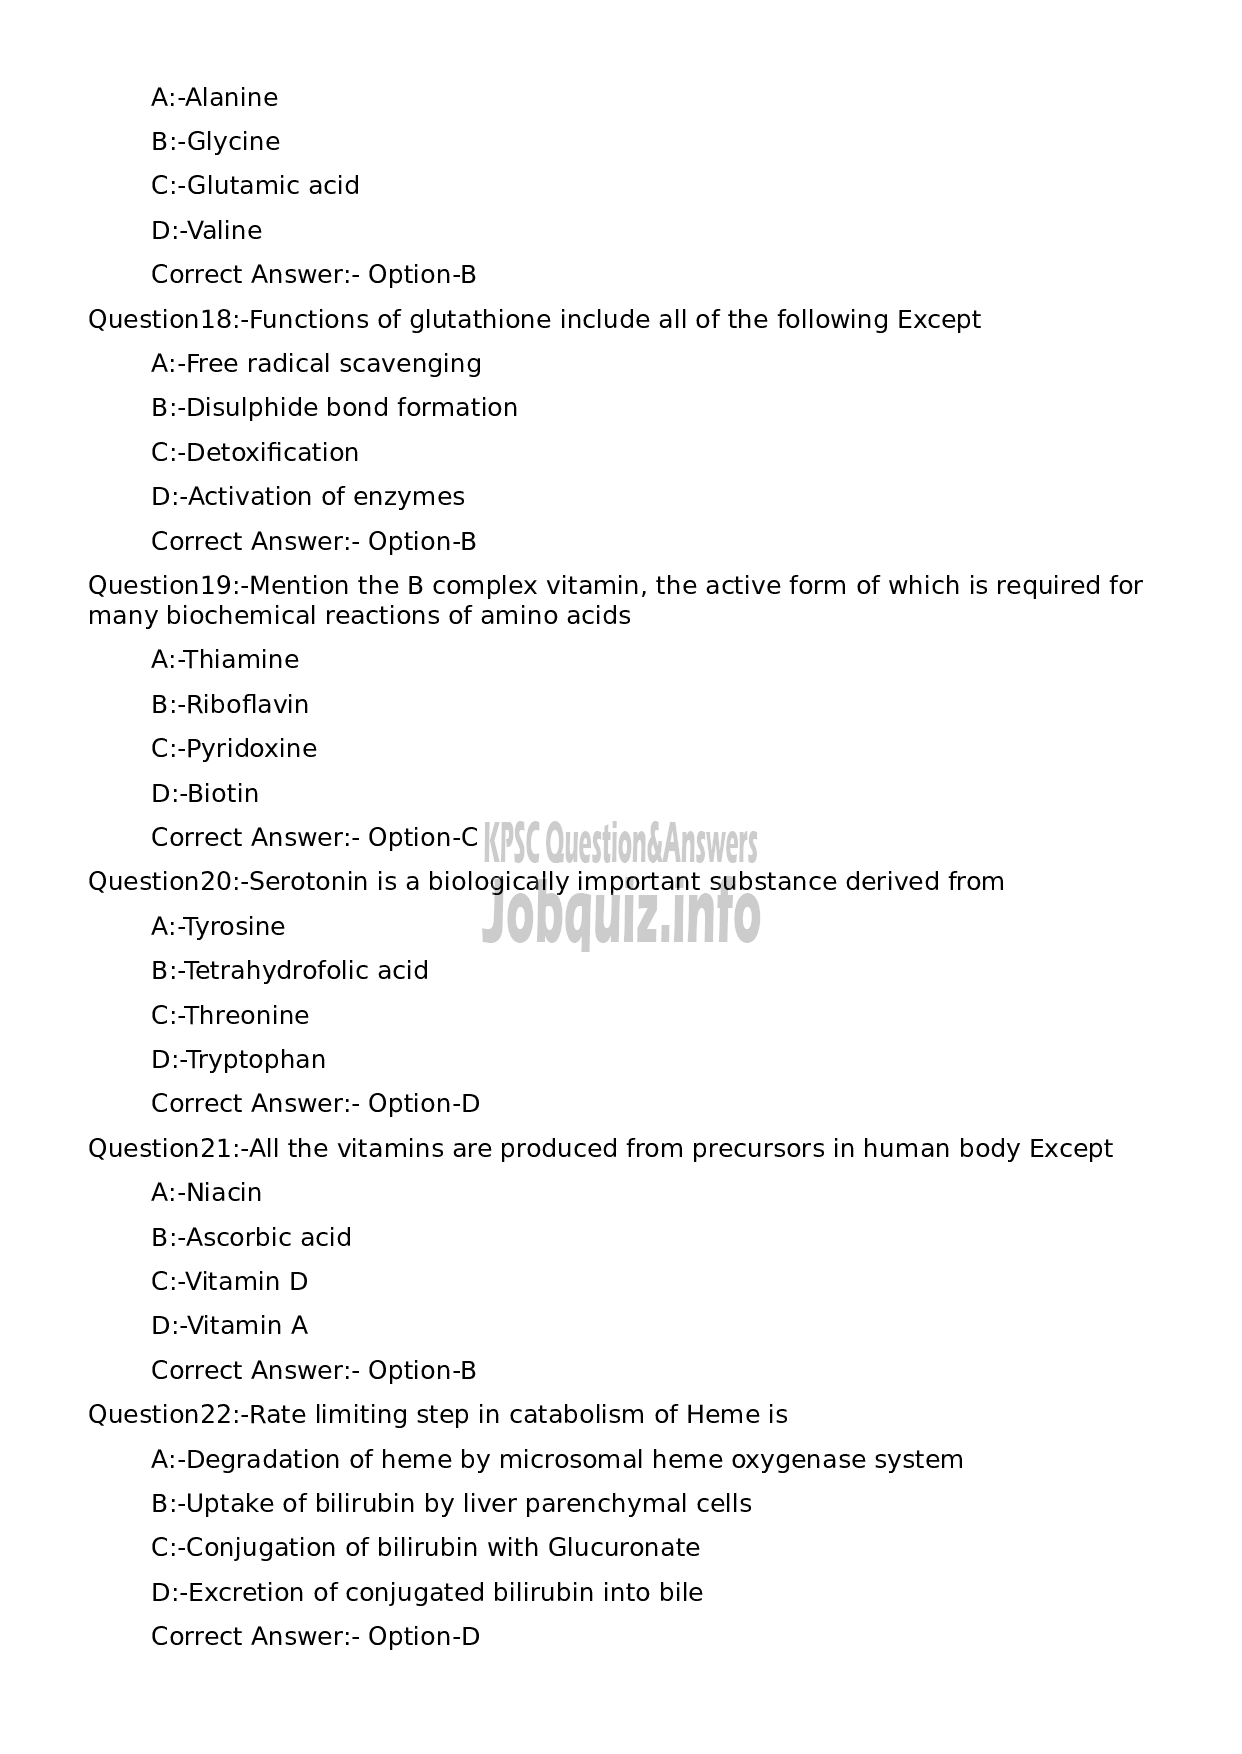 Kerala PSC Question Paper -  Assistant Professor Physiology and Biochemistry-4